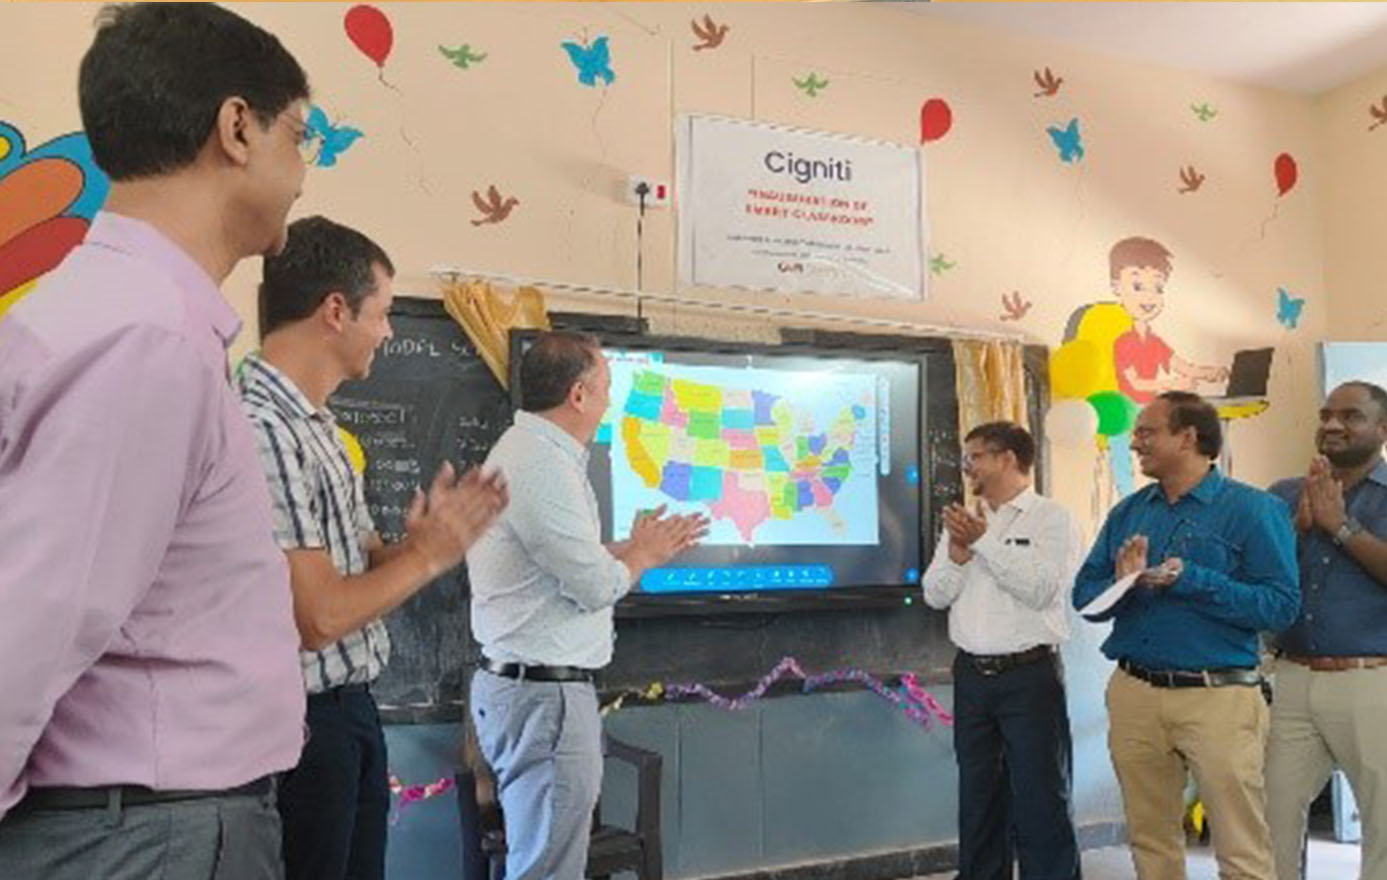 SMART Classroom Inaugurated at a Government School as part of Project Cignificance